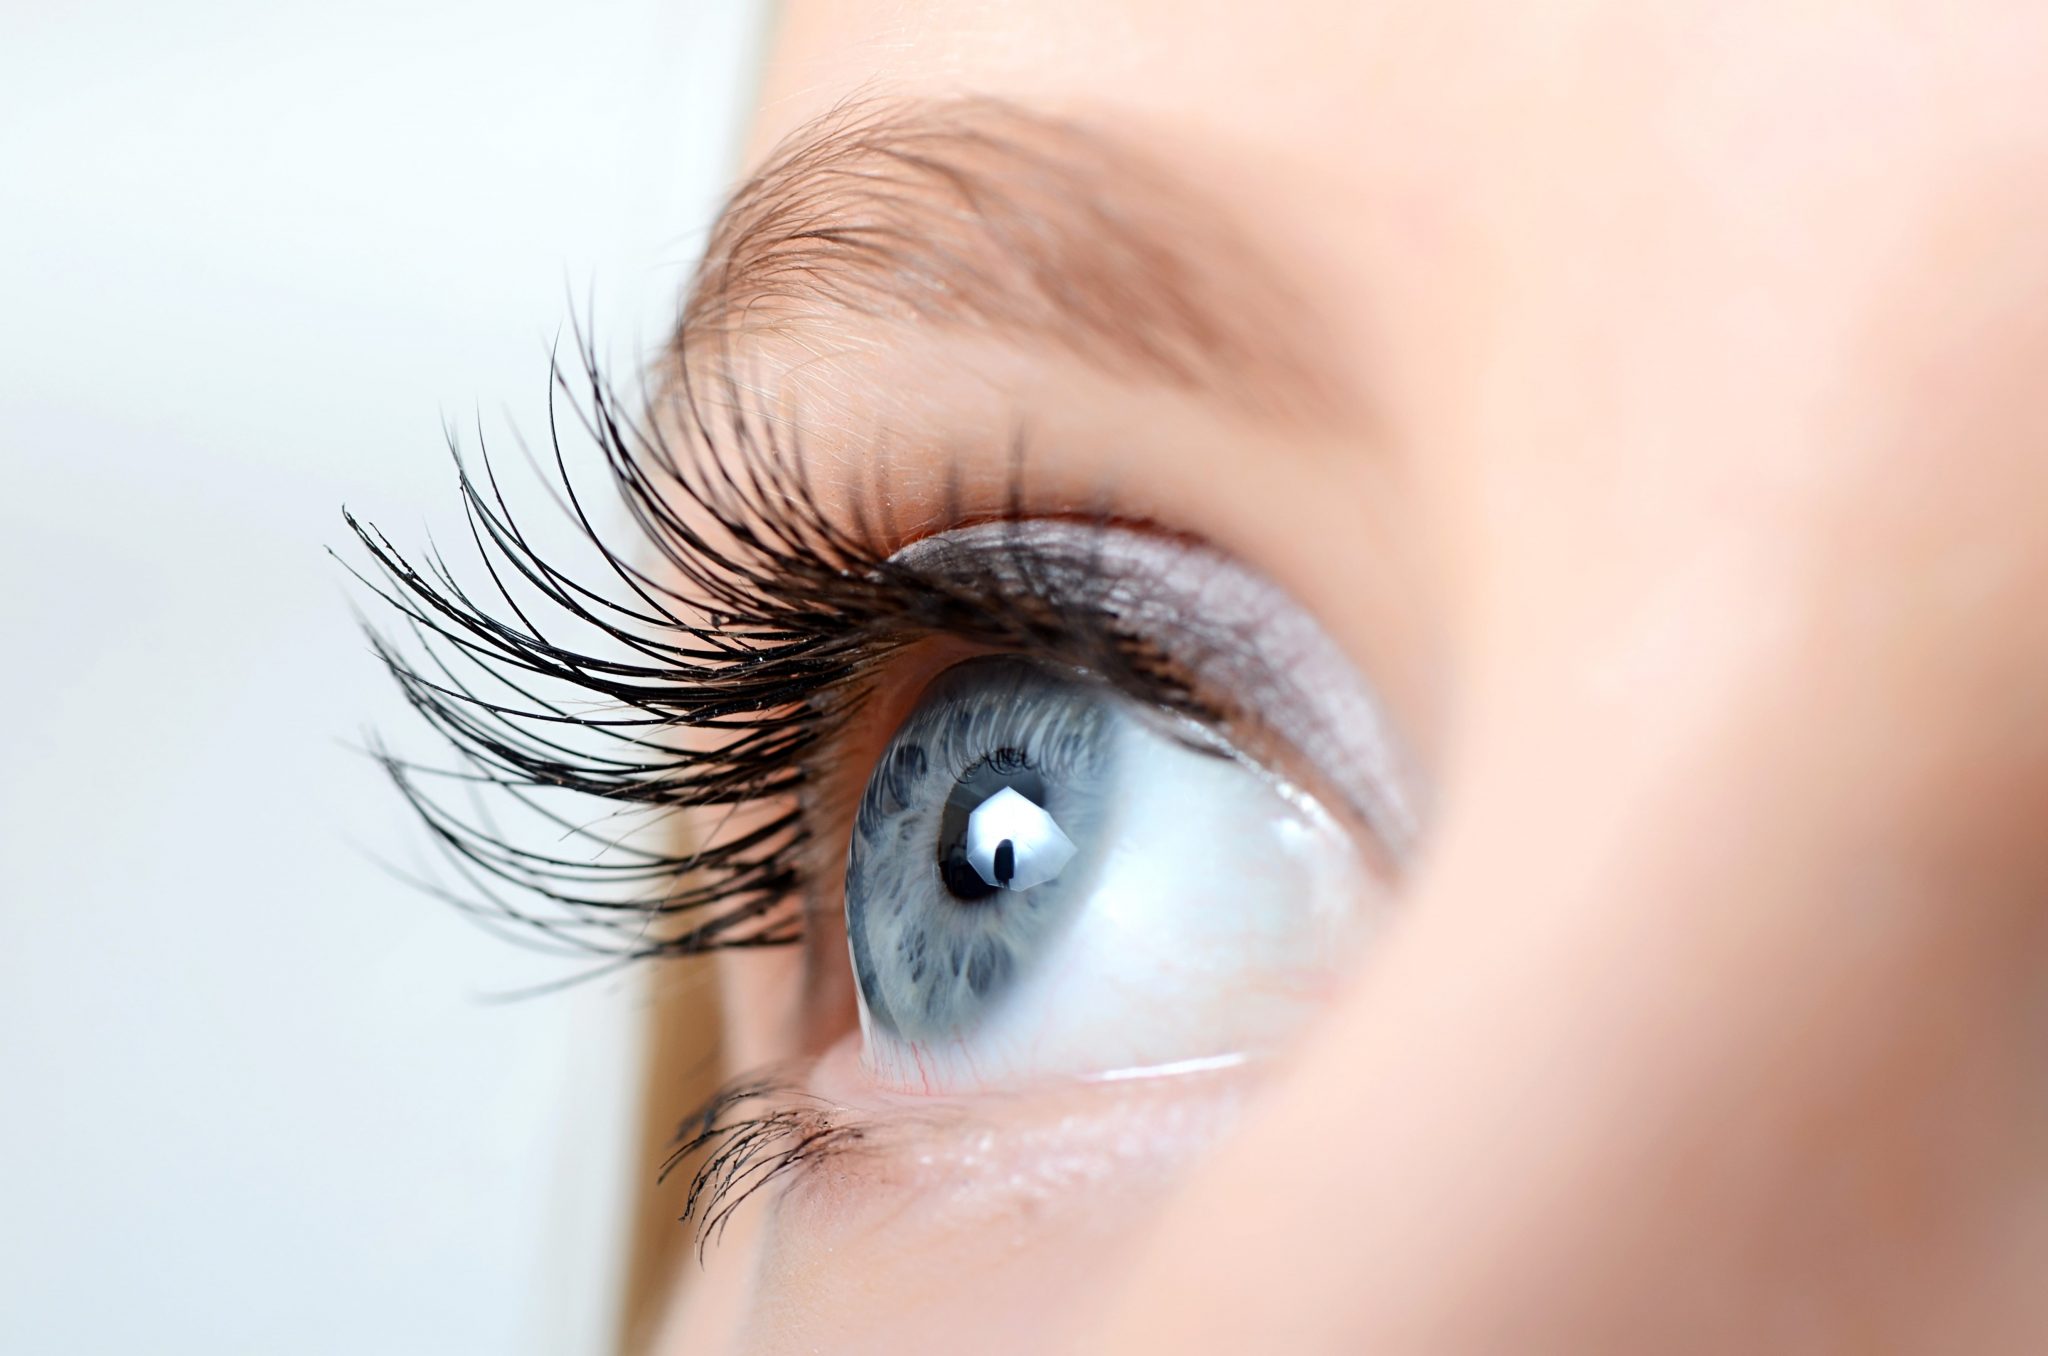 What are cluster eyelashes?